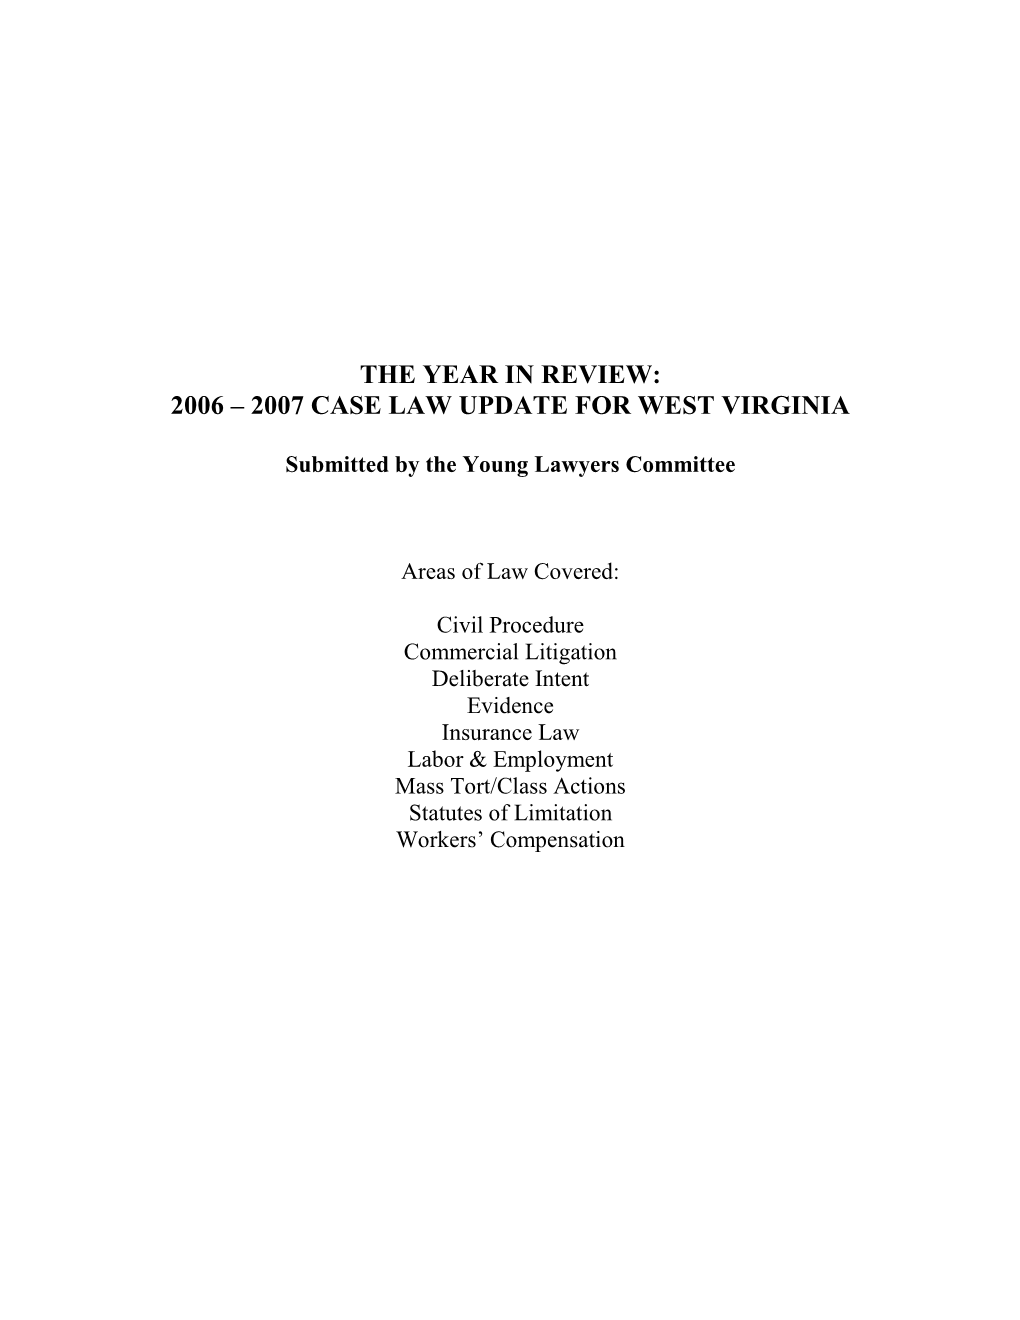 The Year in Review: 2006 –2007 Case Law Update for West Virginia